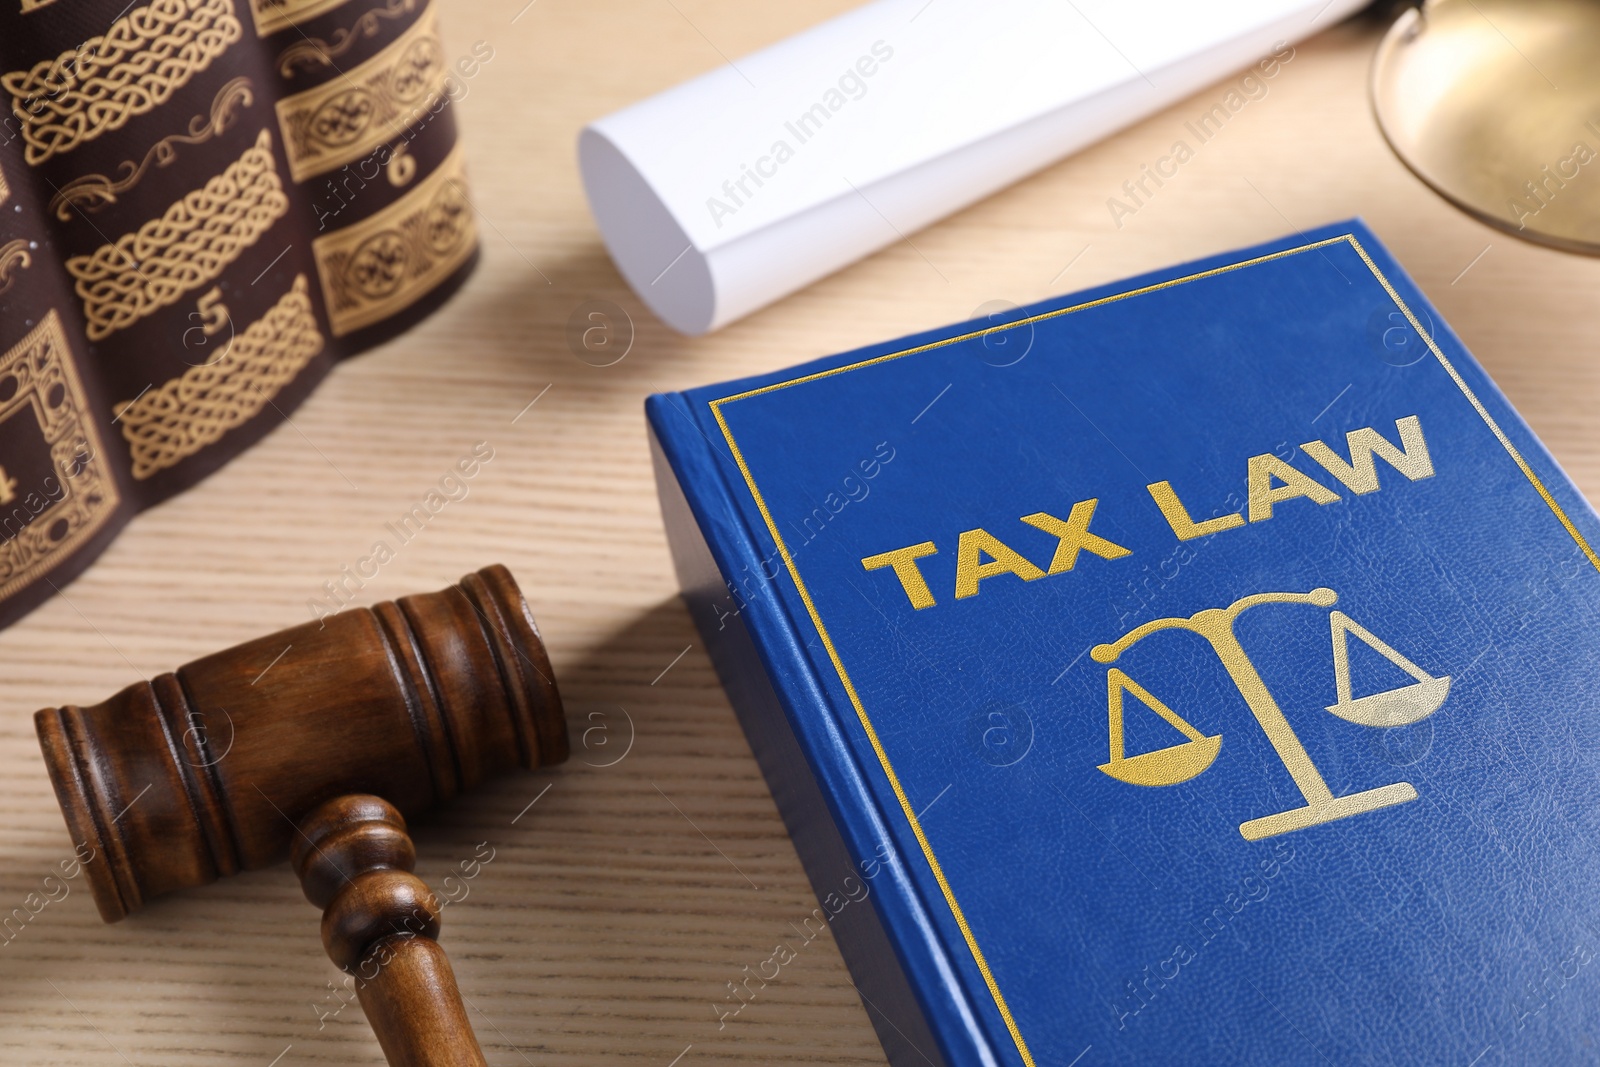 Image of Tax law book and gavel on wooden table